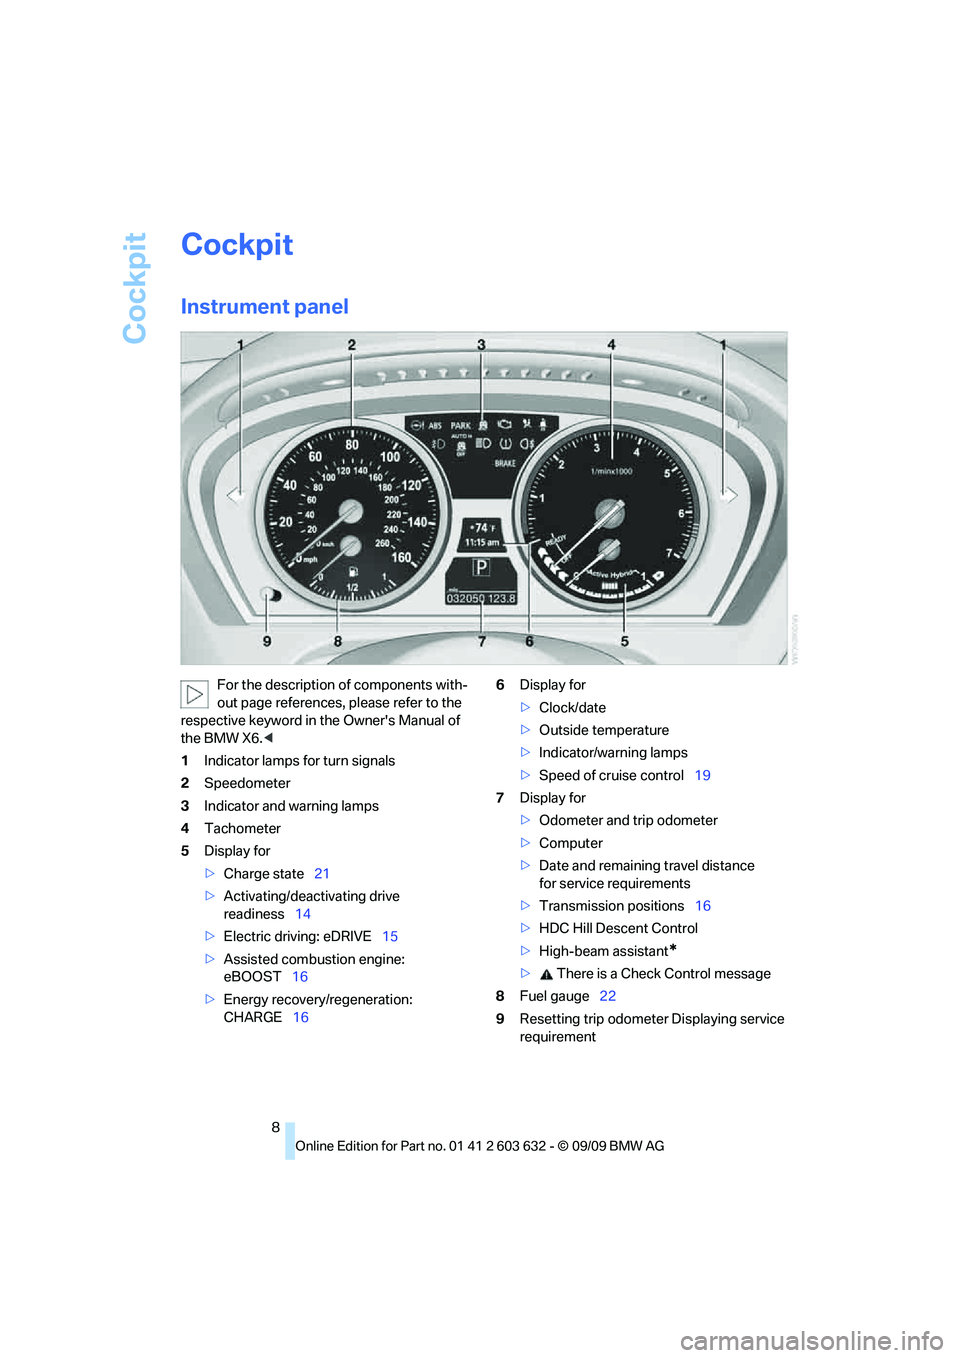 BMW ACTIVEHYBRID X6 2010  Owners Manual Cockpit
8
Cockpit
Instrument panel
For the description of components with-
out page references, please refer to the 
respective keyword in the Owners Manual of 
the BMW X6.<
1Indicator lamps for turn